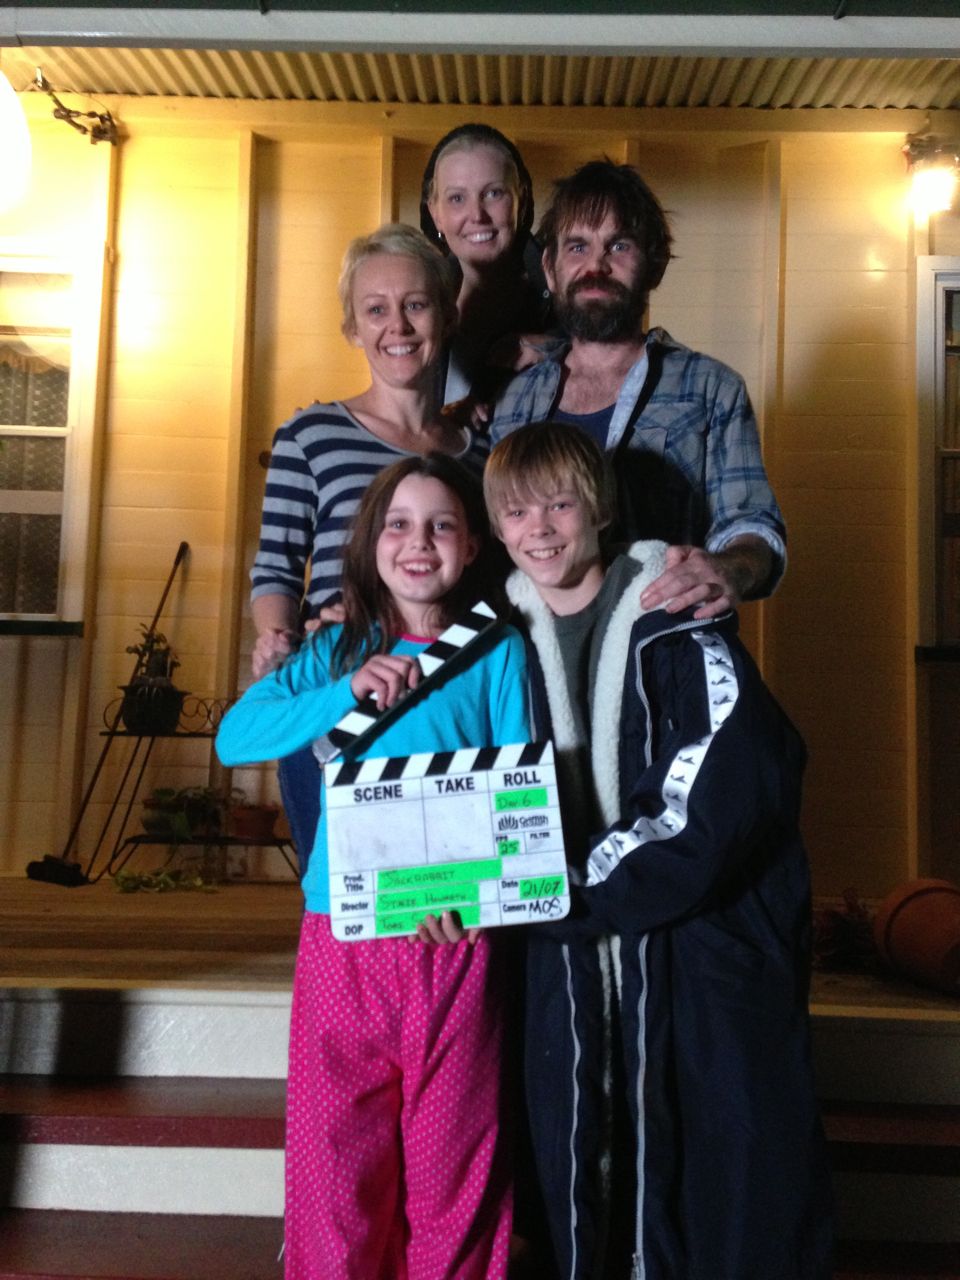 Sophie with fellow cast members Belinda Small, Dan Eady and Nic Hamilton with Director Stacie Howarth (at back) after wrapping on Jackrabbit (2013).